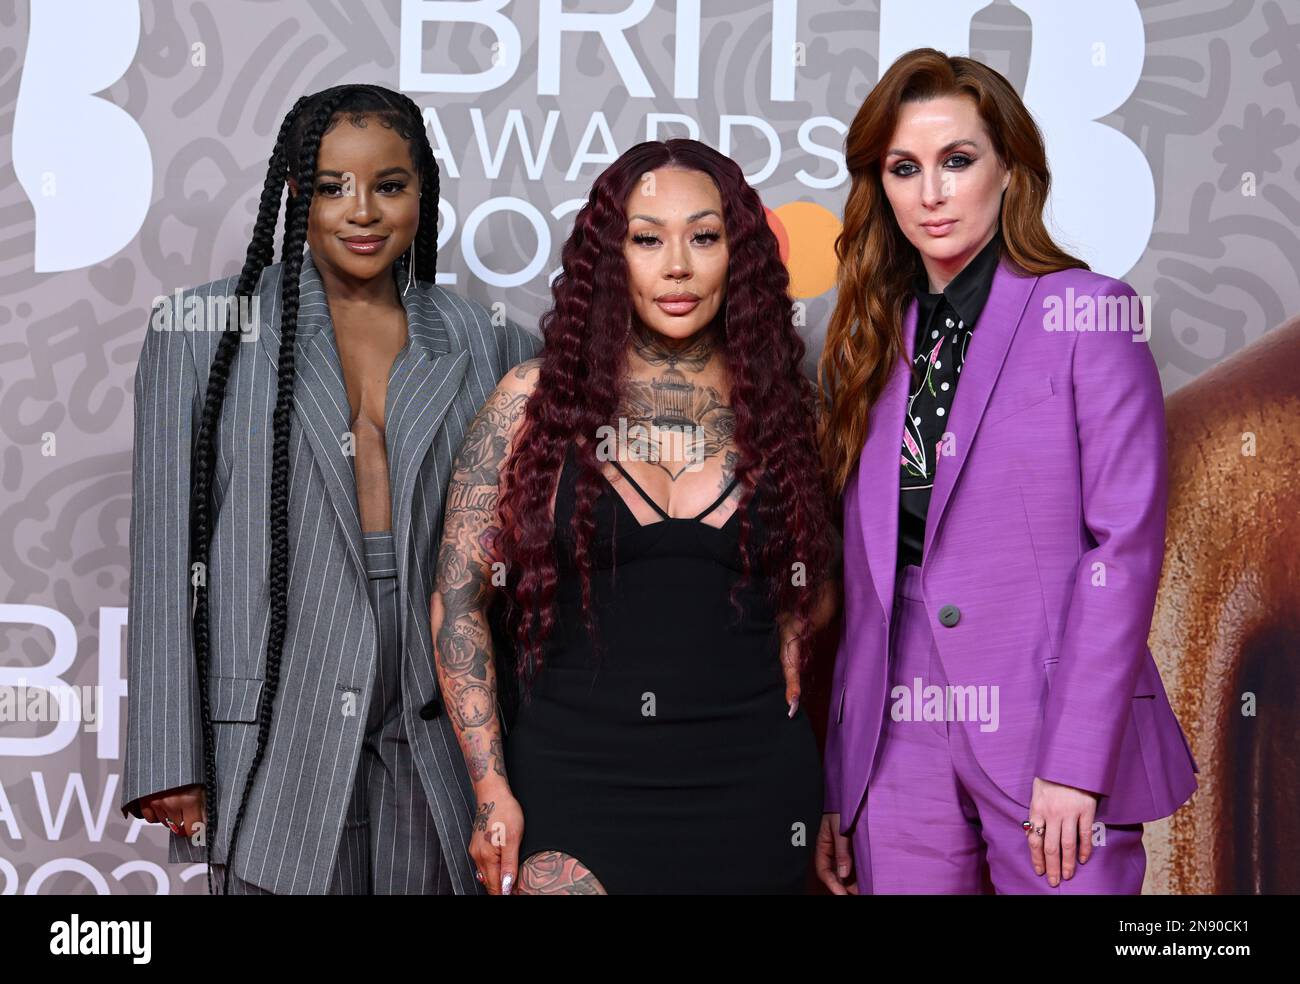 EDITORIAL USE ONLY February 11th, 2023, London, UK. Keisha Buchanan, Mutya Buena and Siobhan Donaghy from the Sugababes arriving at The BRIT Awards 2023, O2 Arena, London. Credit: Doug Peters/EMPICS/Alamy Live News Stock Photo